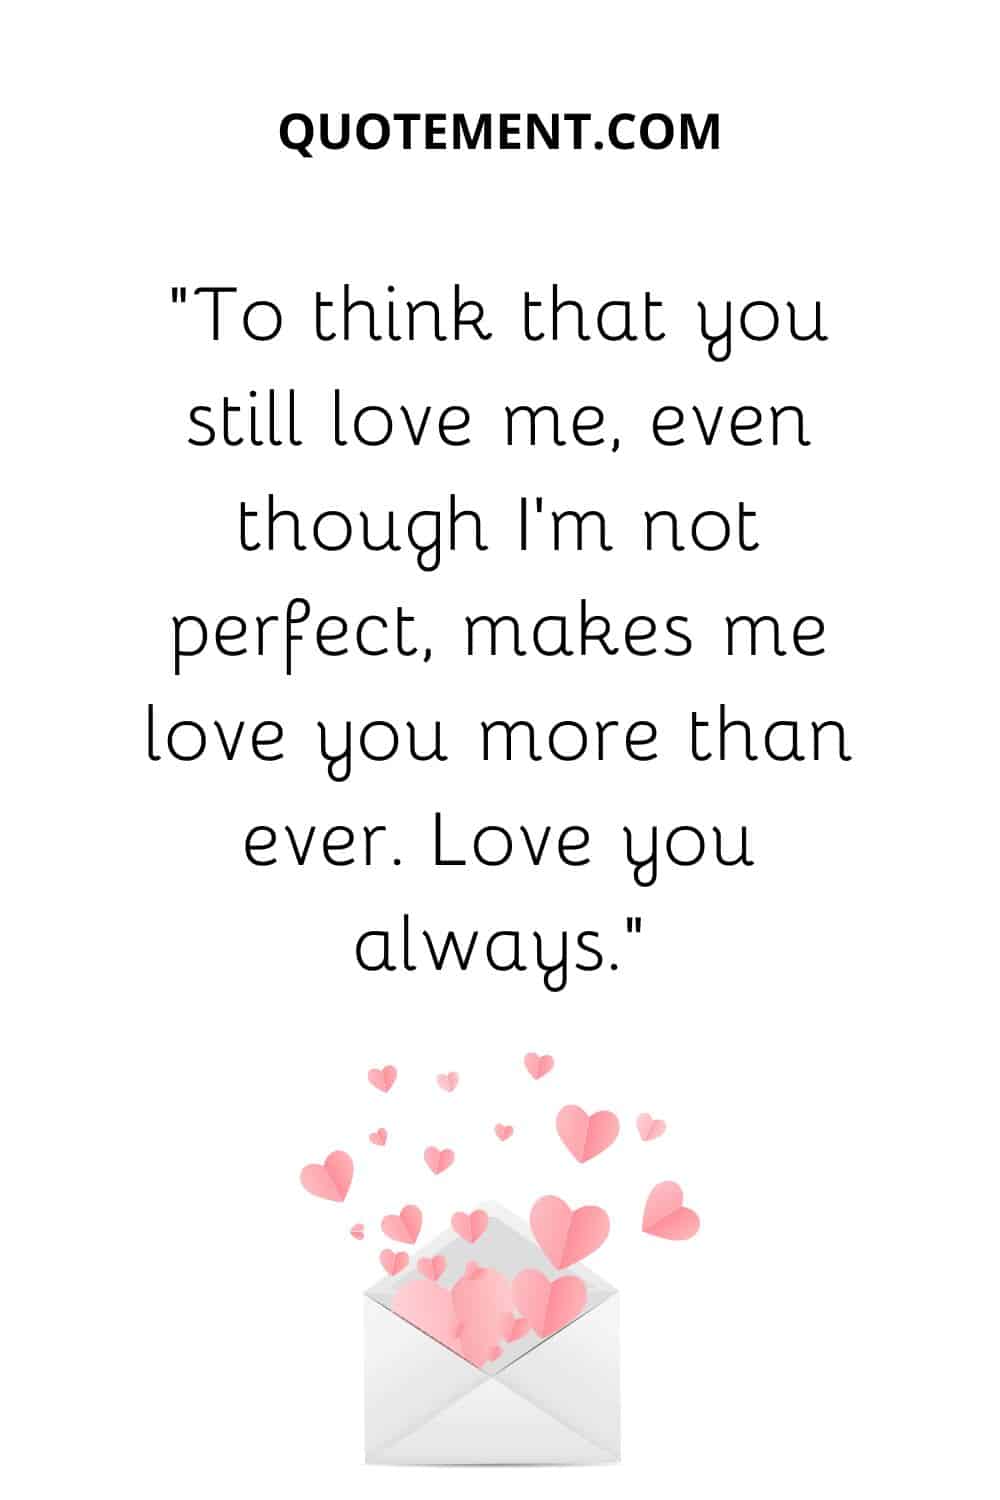 “To think that you still love me, even though I’m not perfect, makes me love you more than ever. Love you always.”